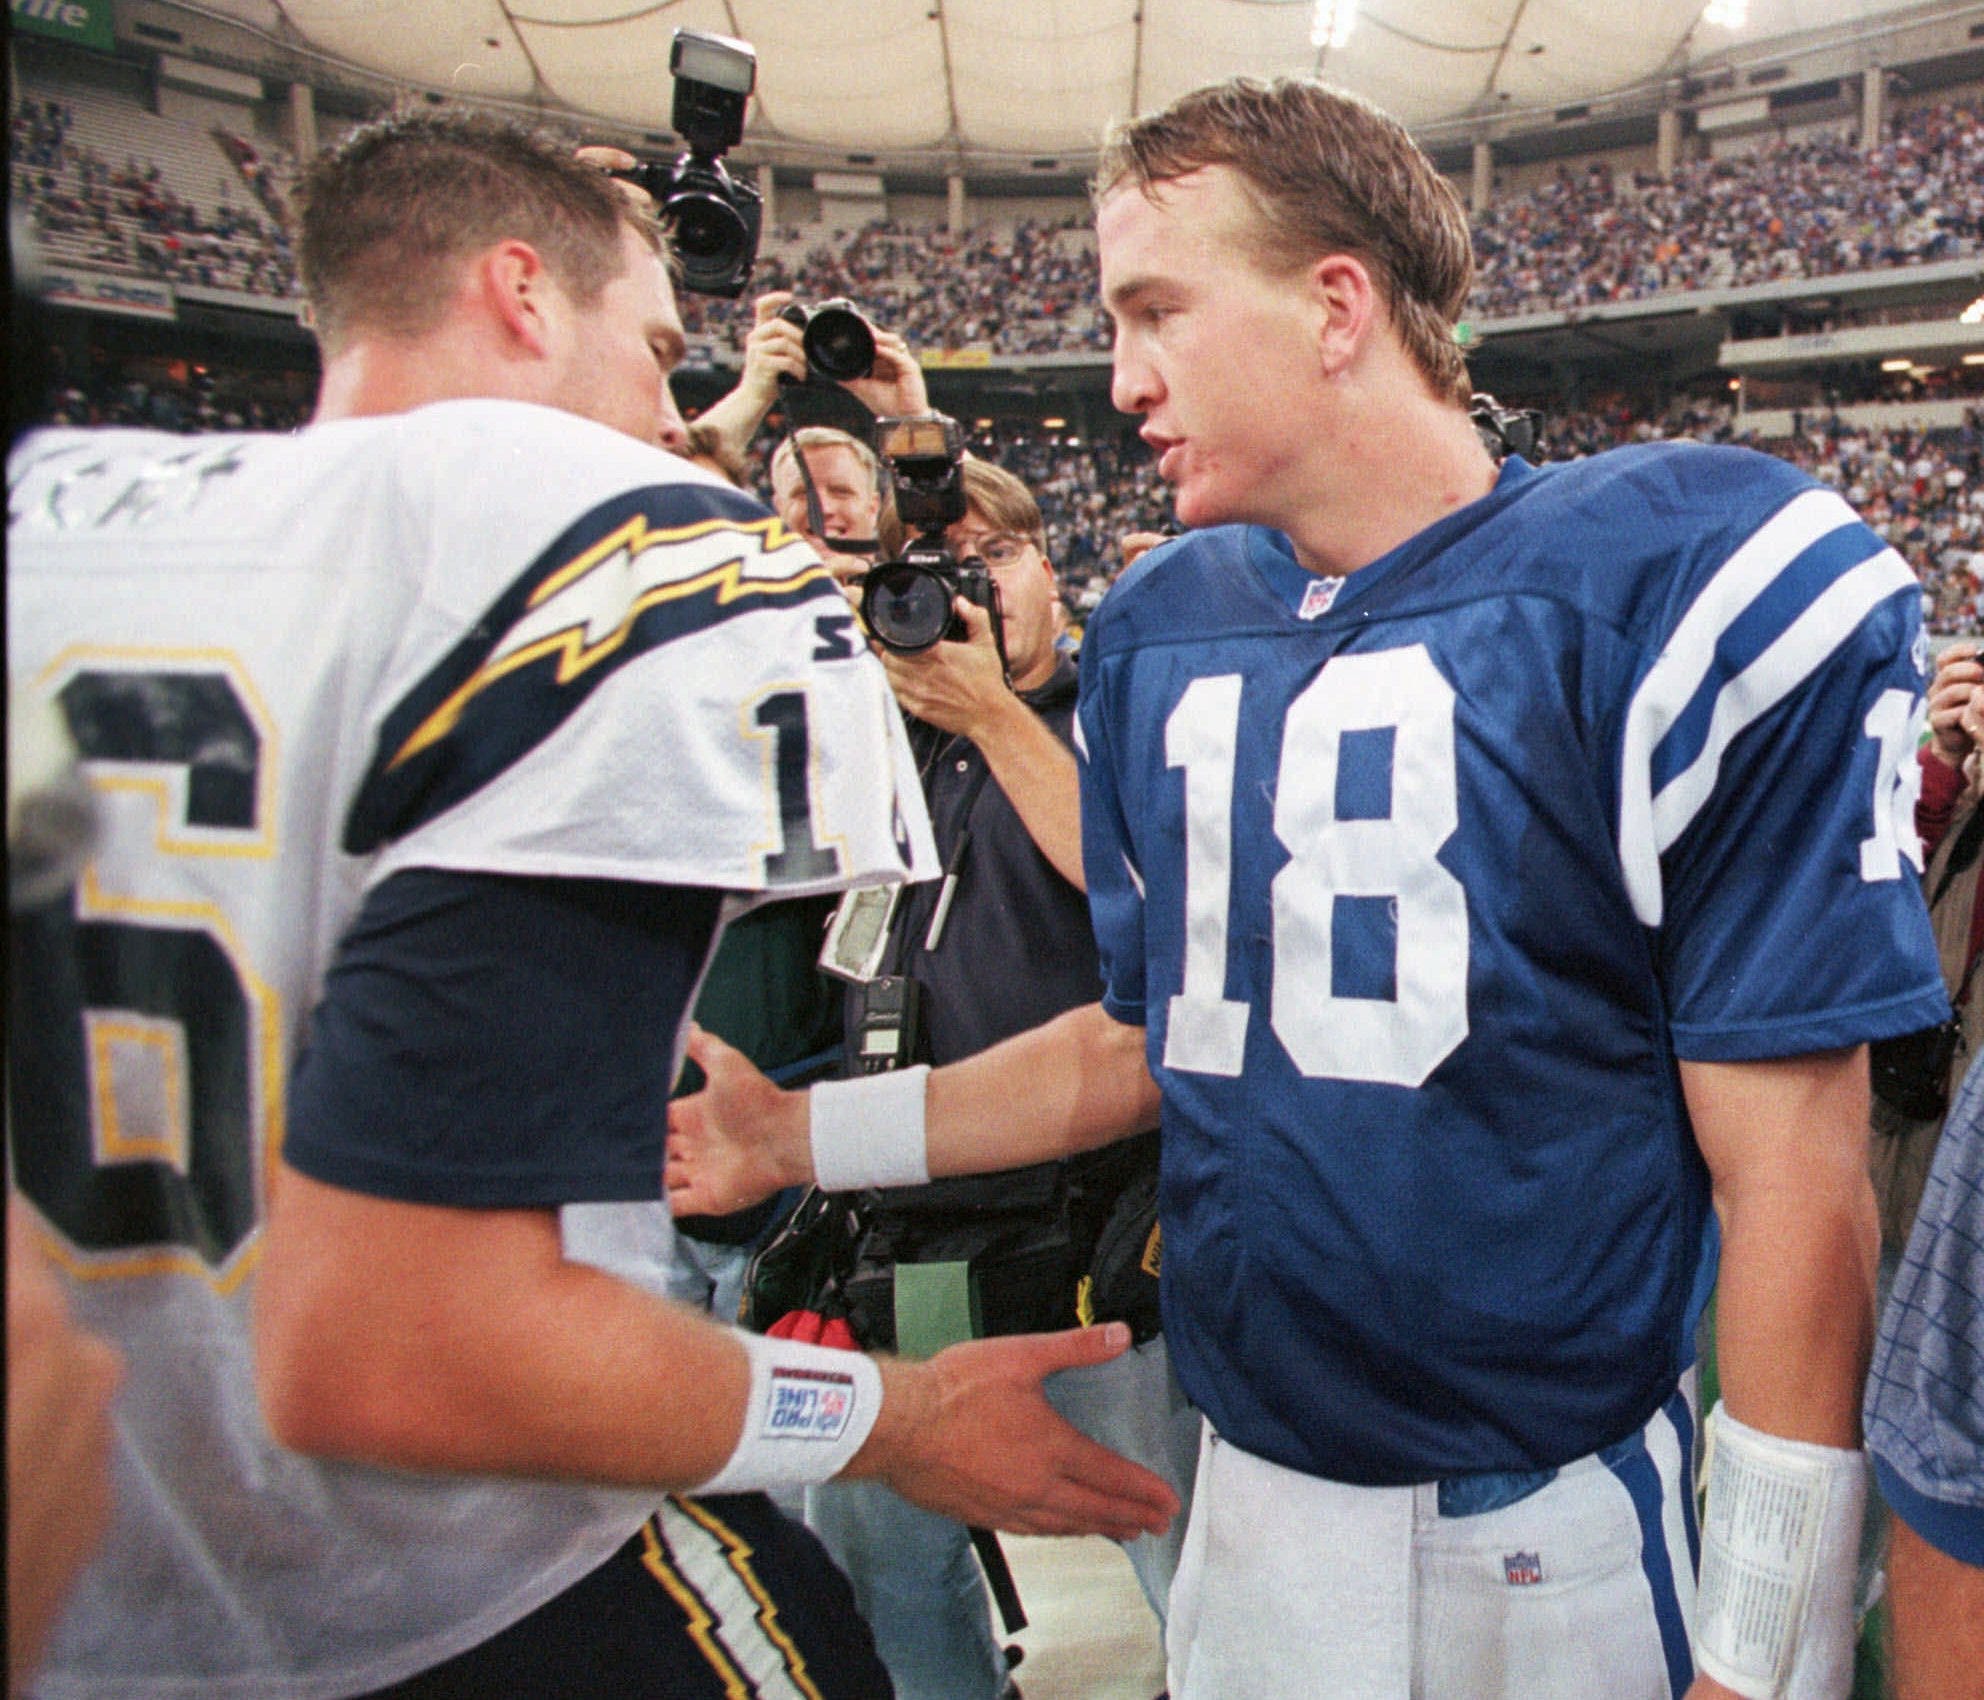 Ryan Leaf has expletive-laden response to former Indianapolis Colts GM's 1998 predraft criticism